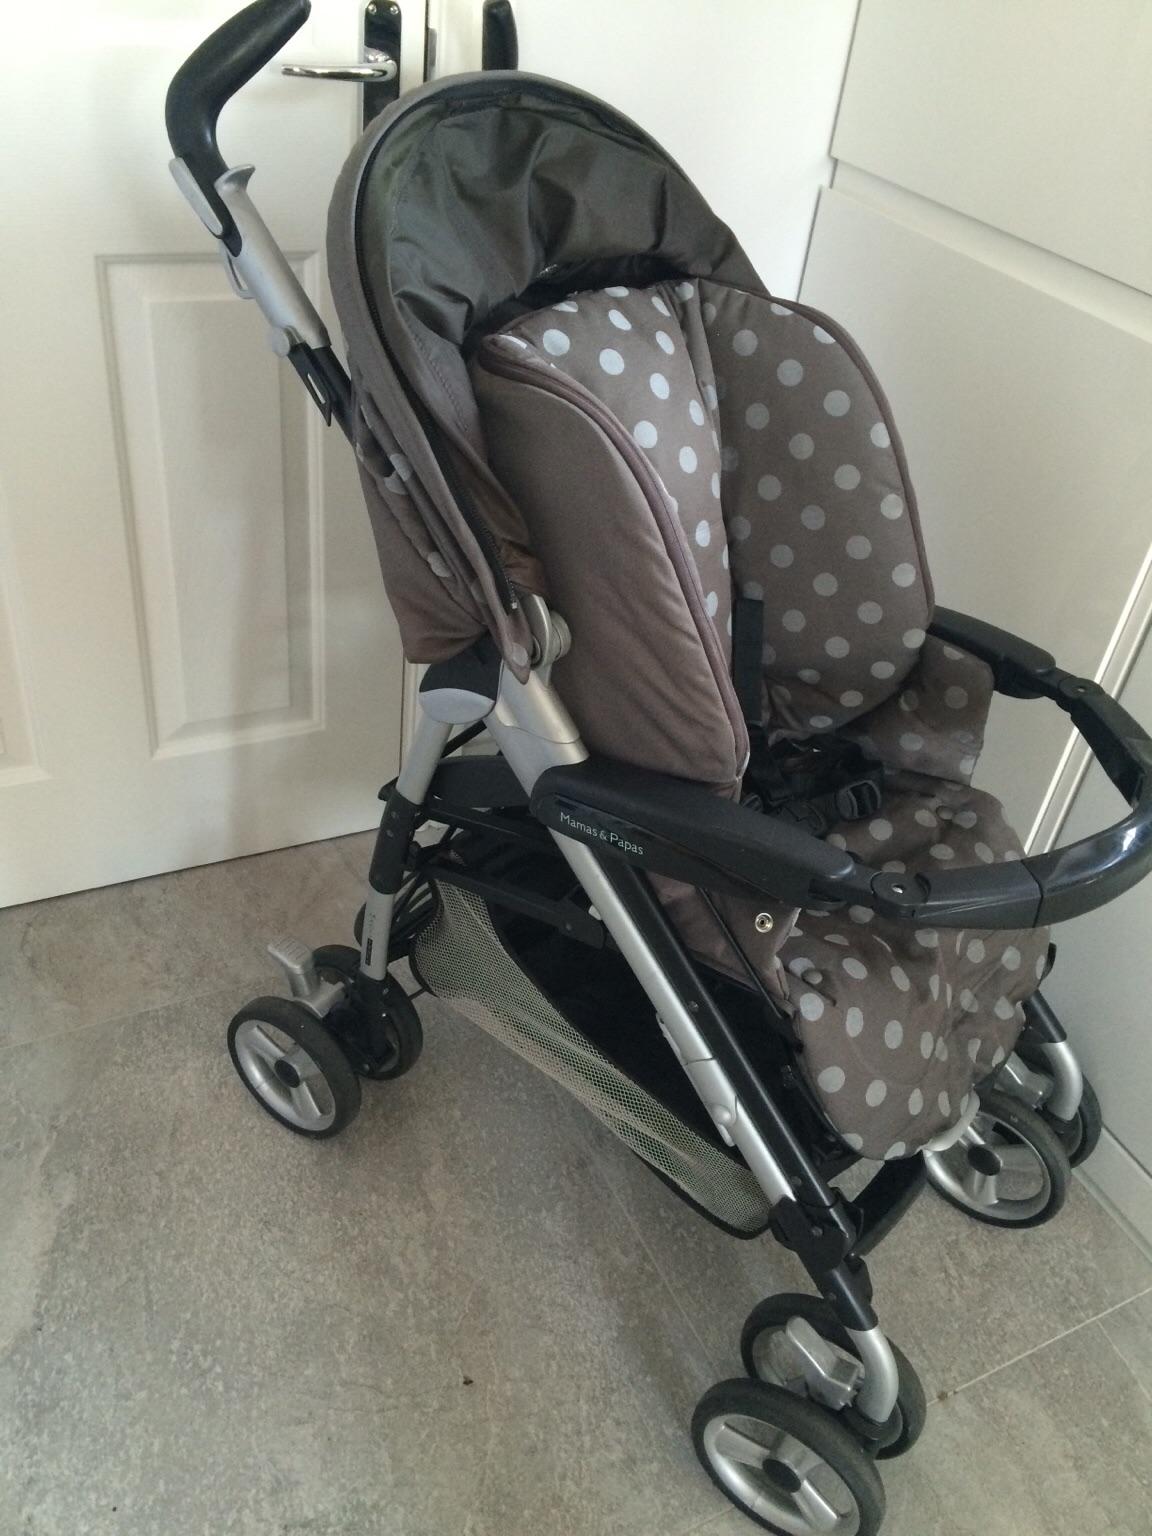 mamas and papas swirl pushchair instructions